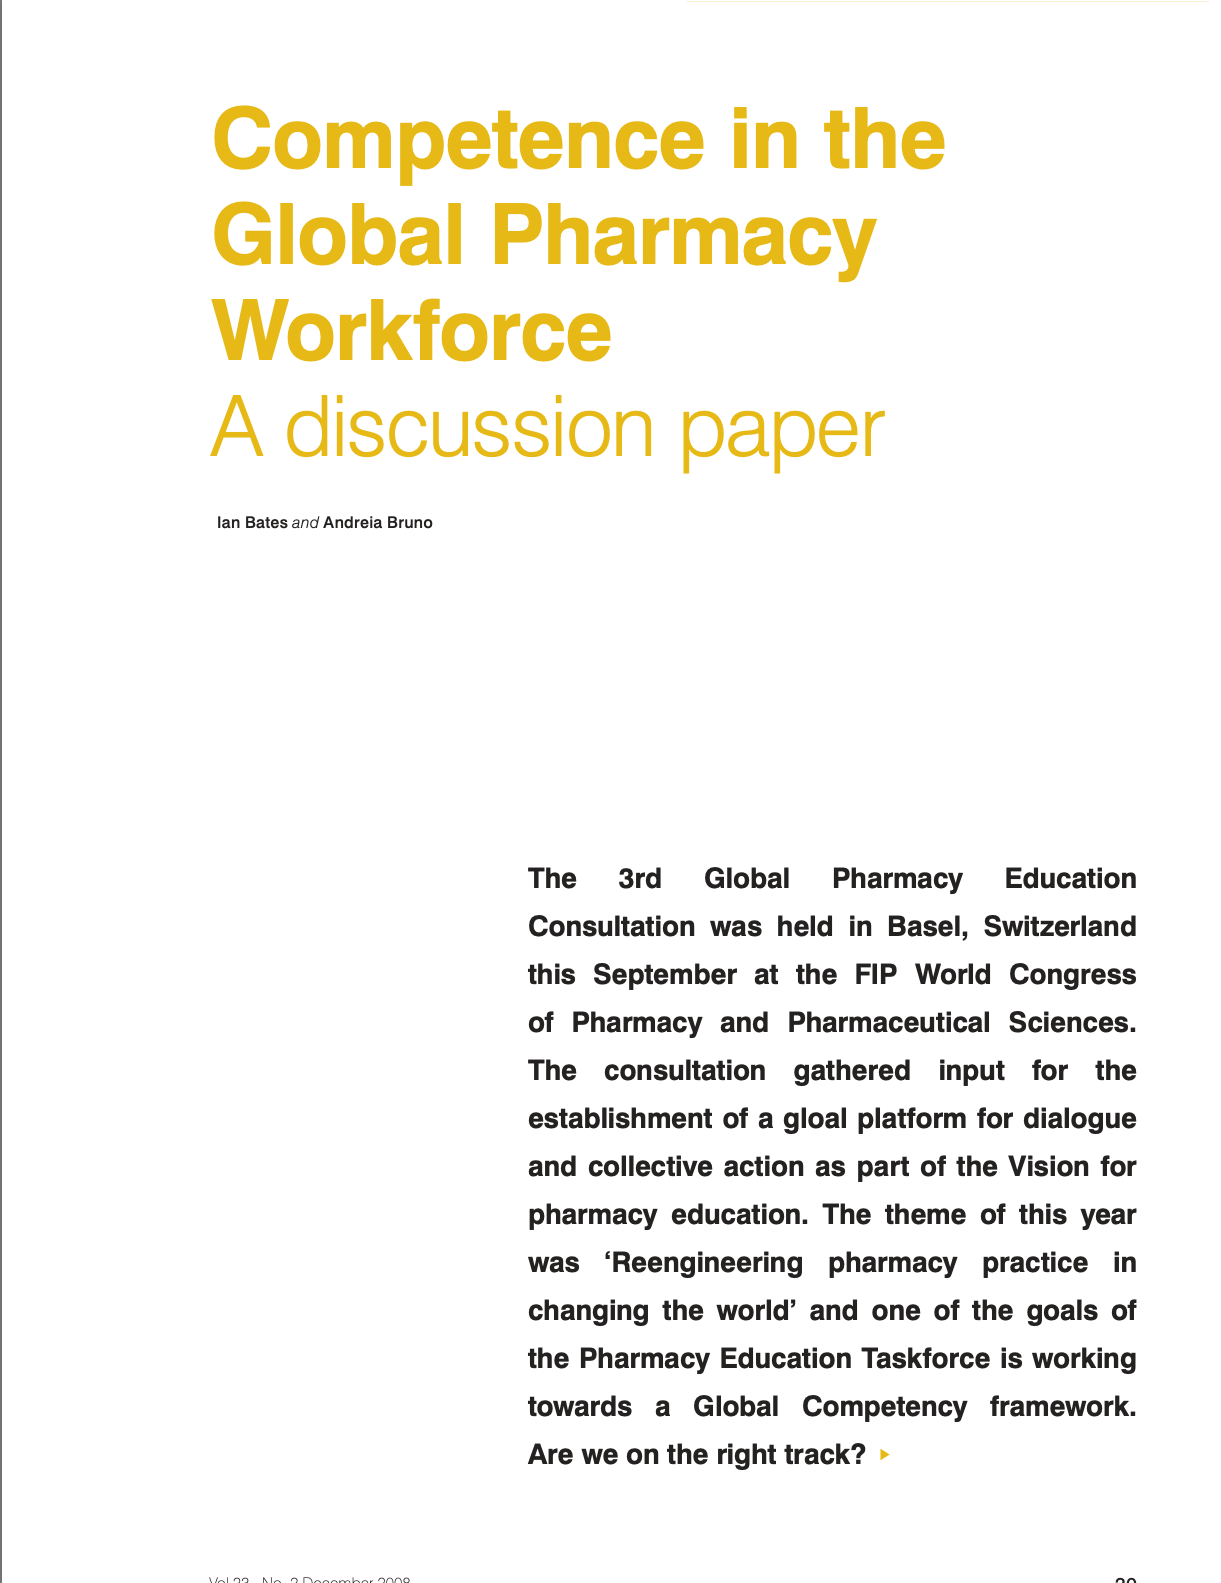 Competence in the Global Pharmacy Workforce: A discussion paper (2008) Thumbnail